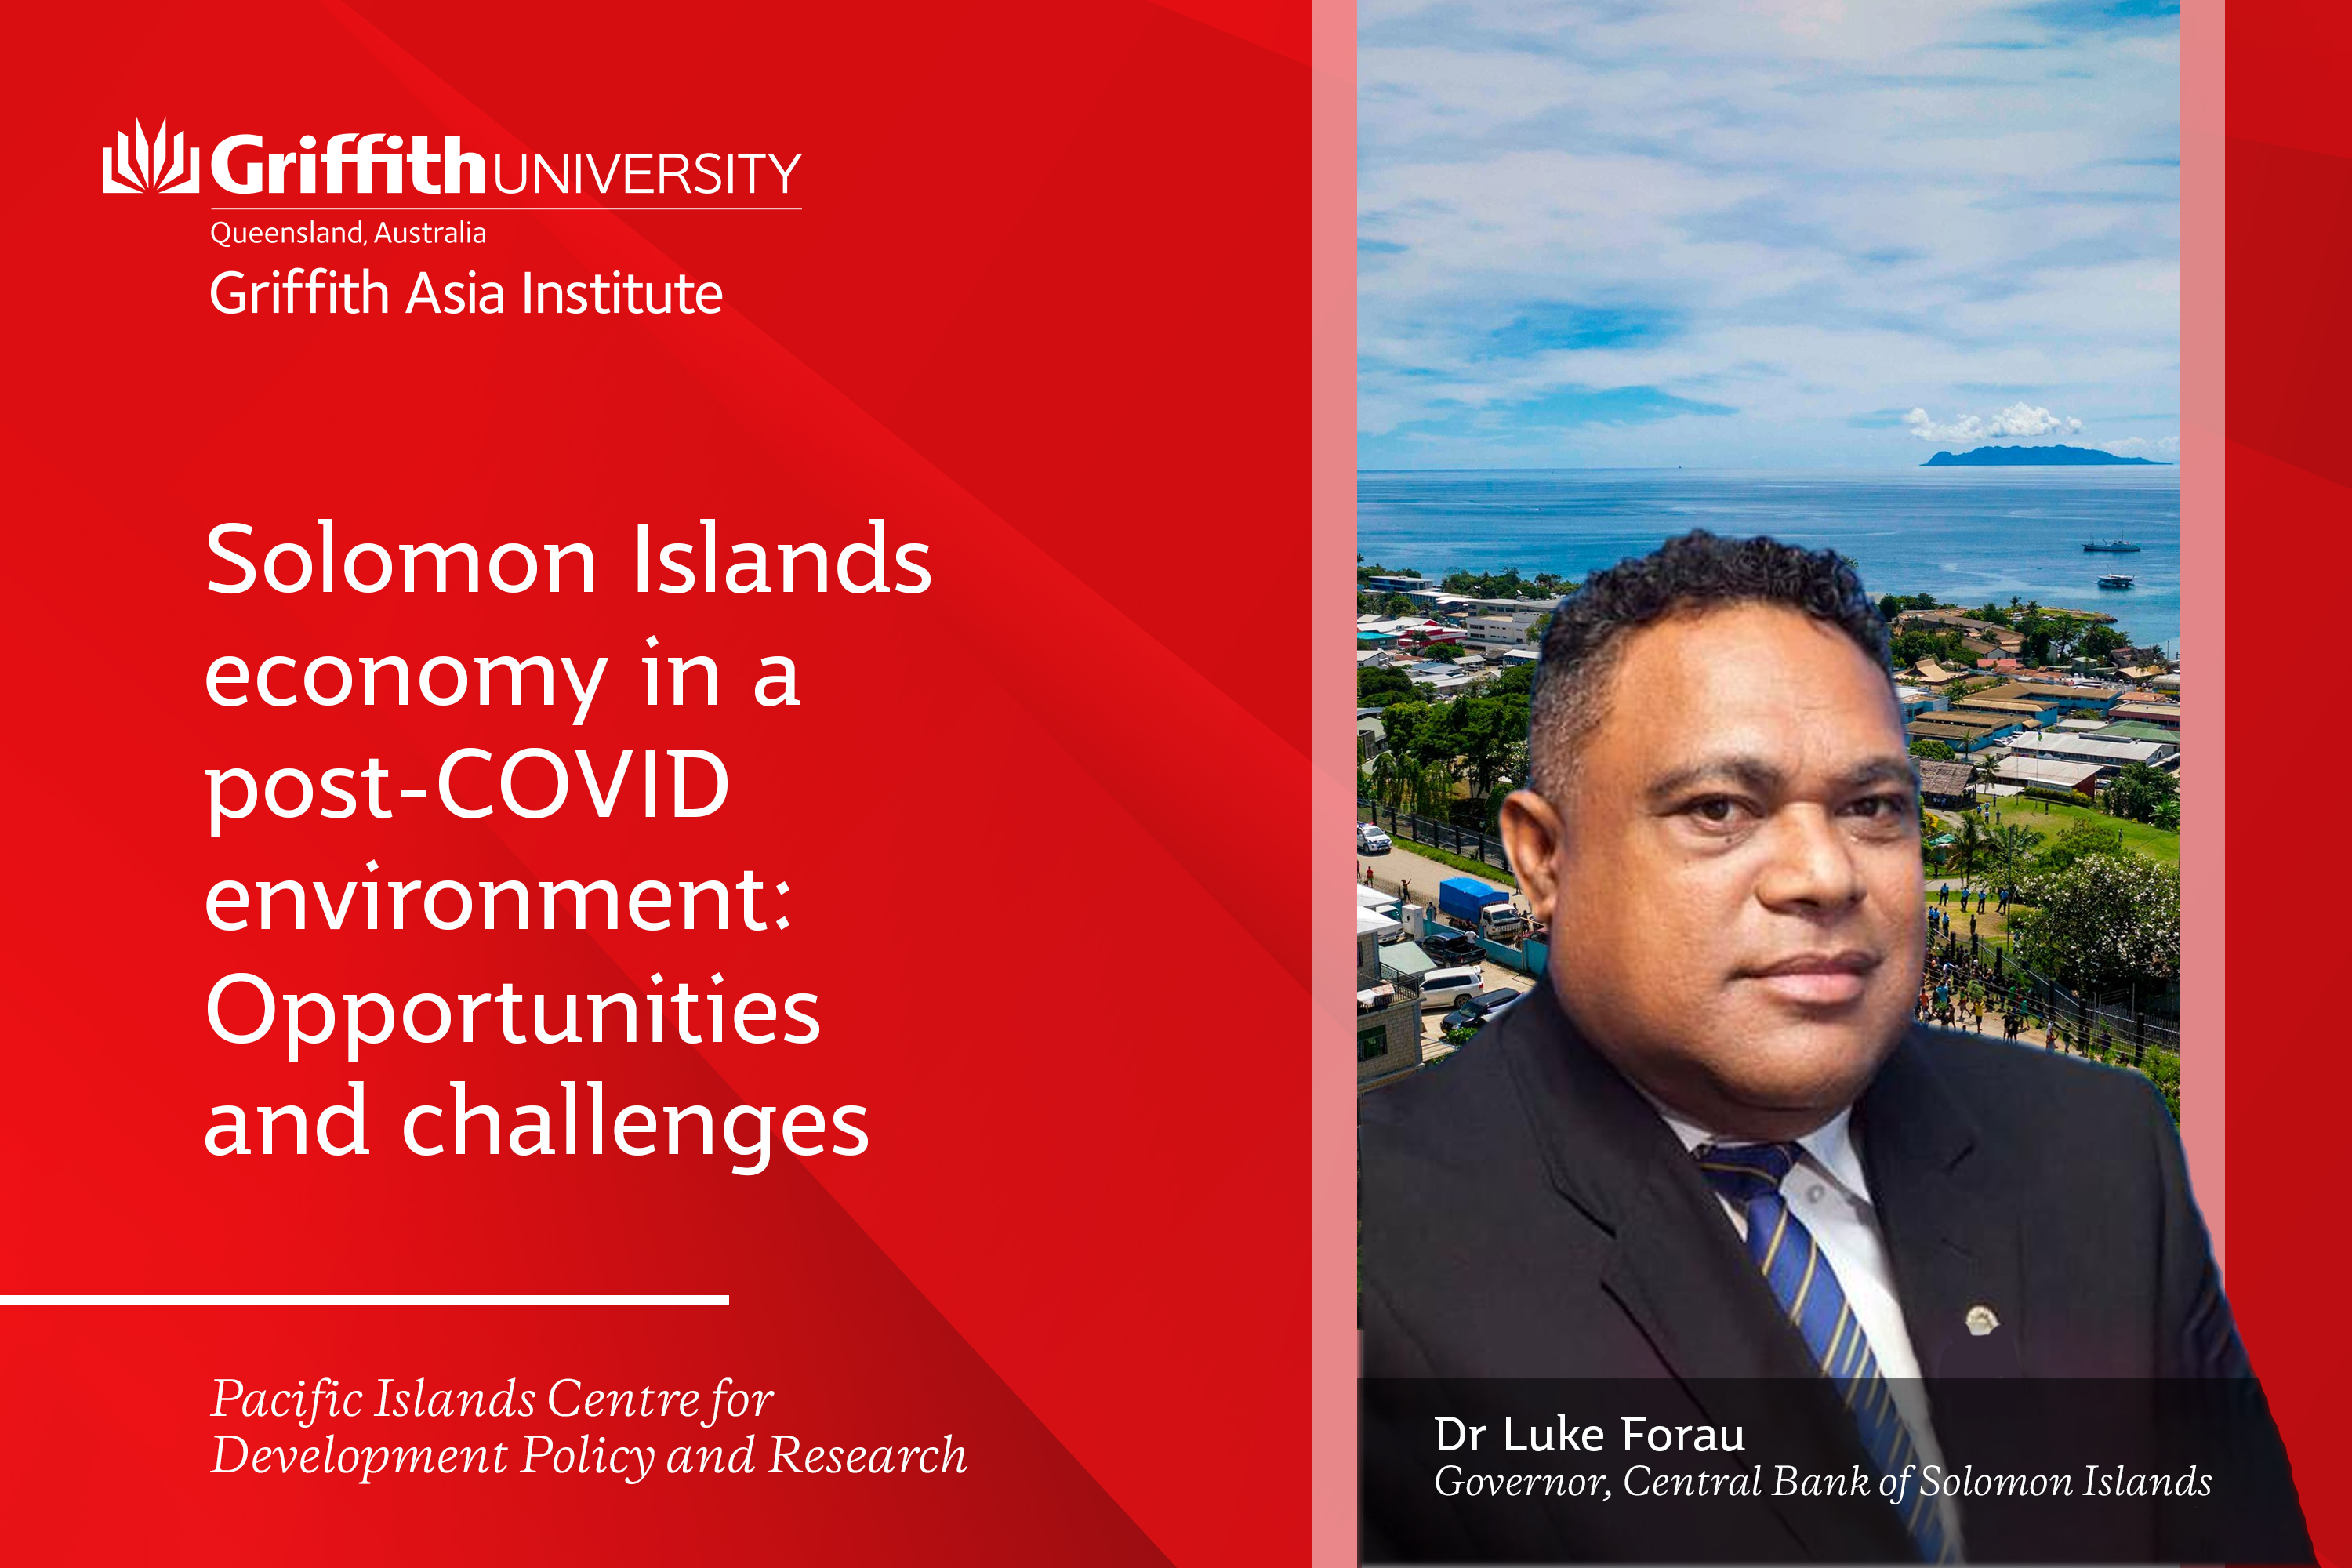 Solomon Islands economy in a post-COVID environment: Opportunities and challenges